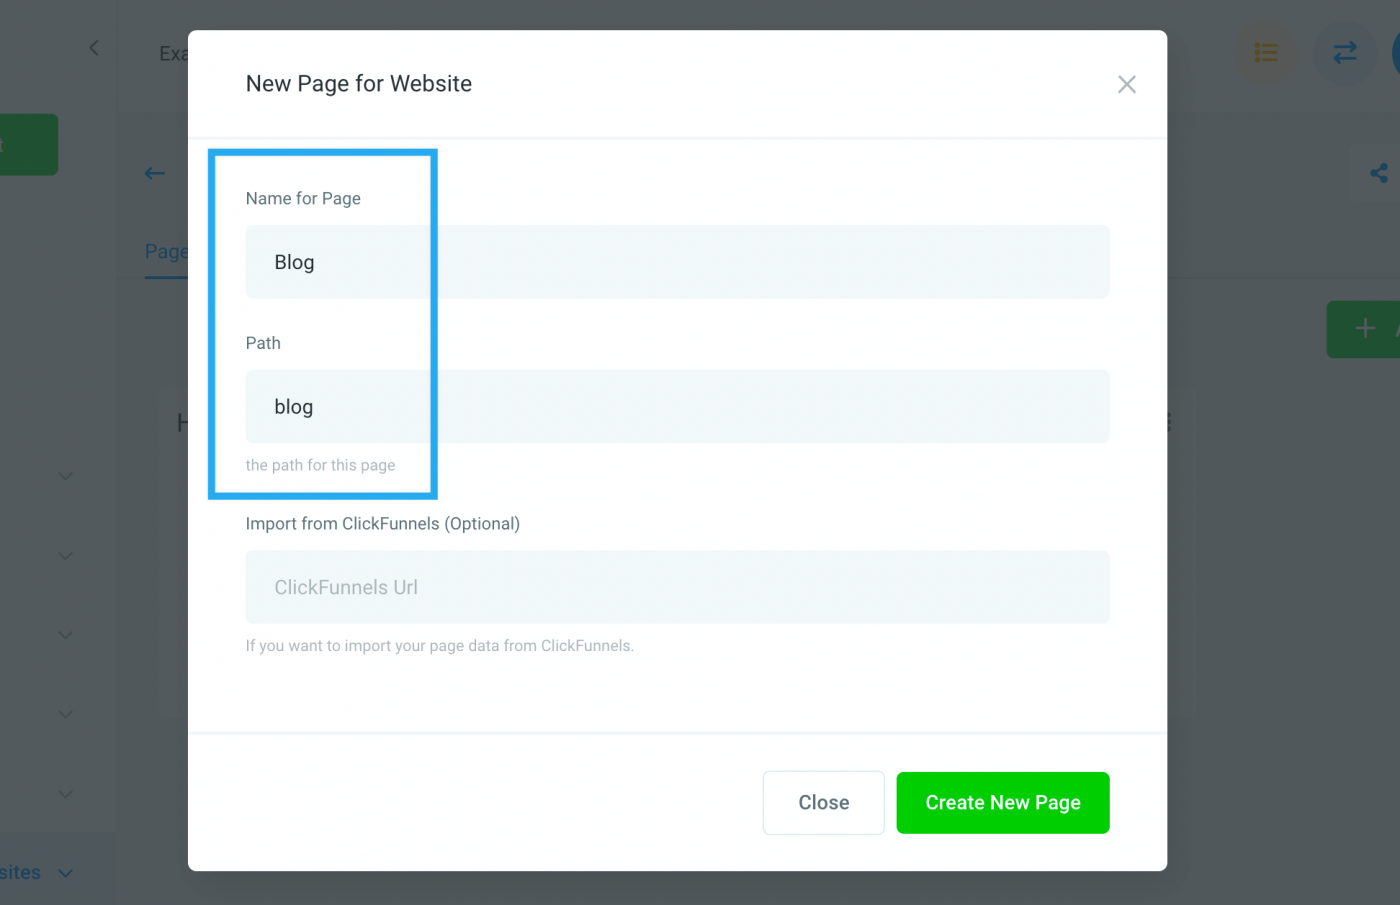 New page dialog, with "blog" as the page slug and "Blog" as the page title